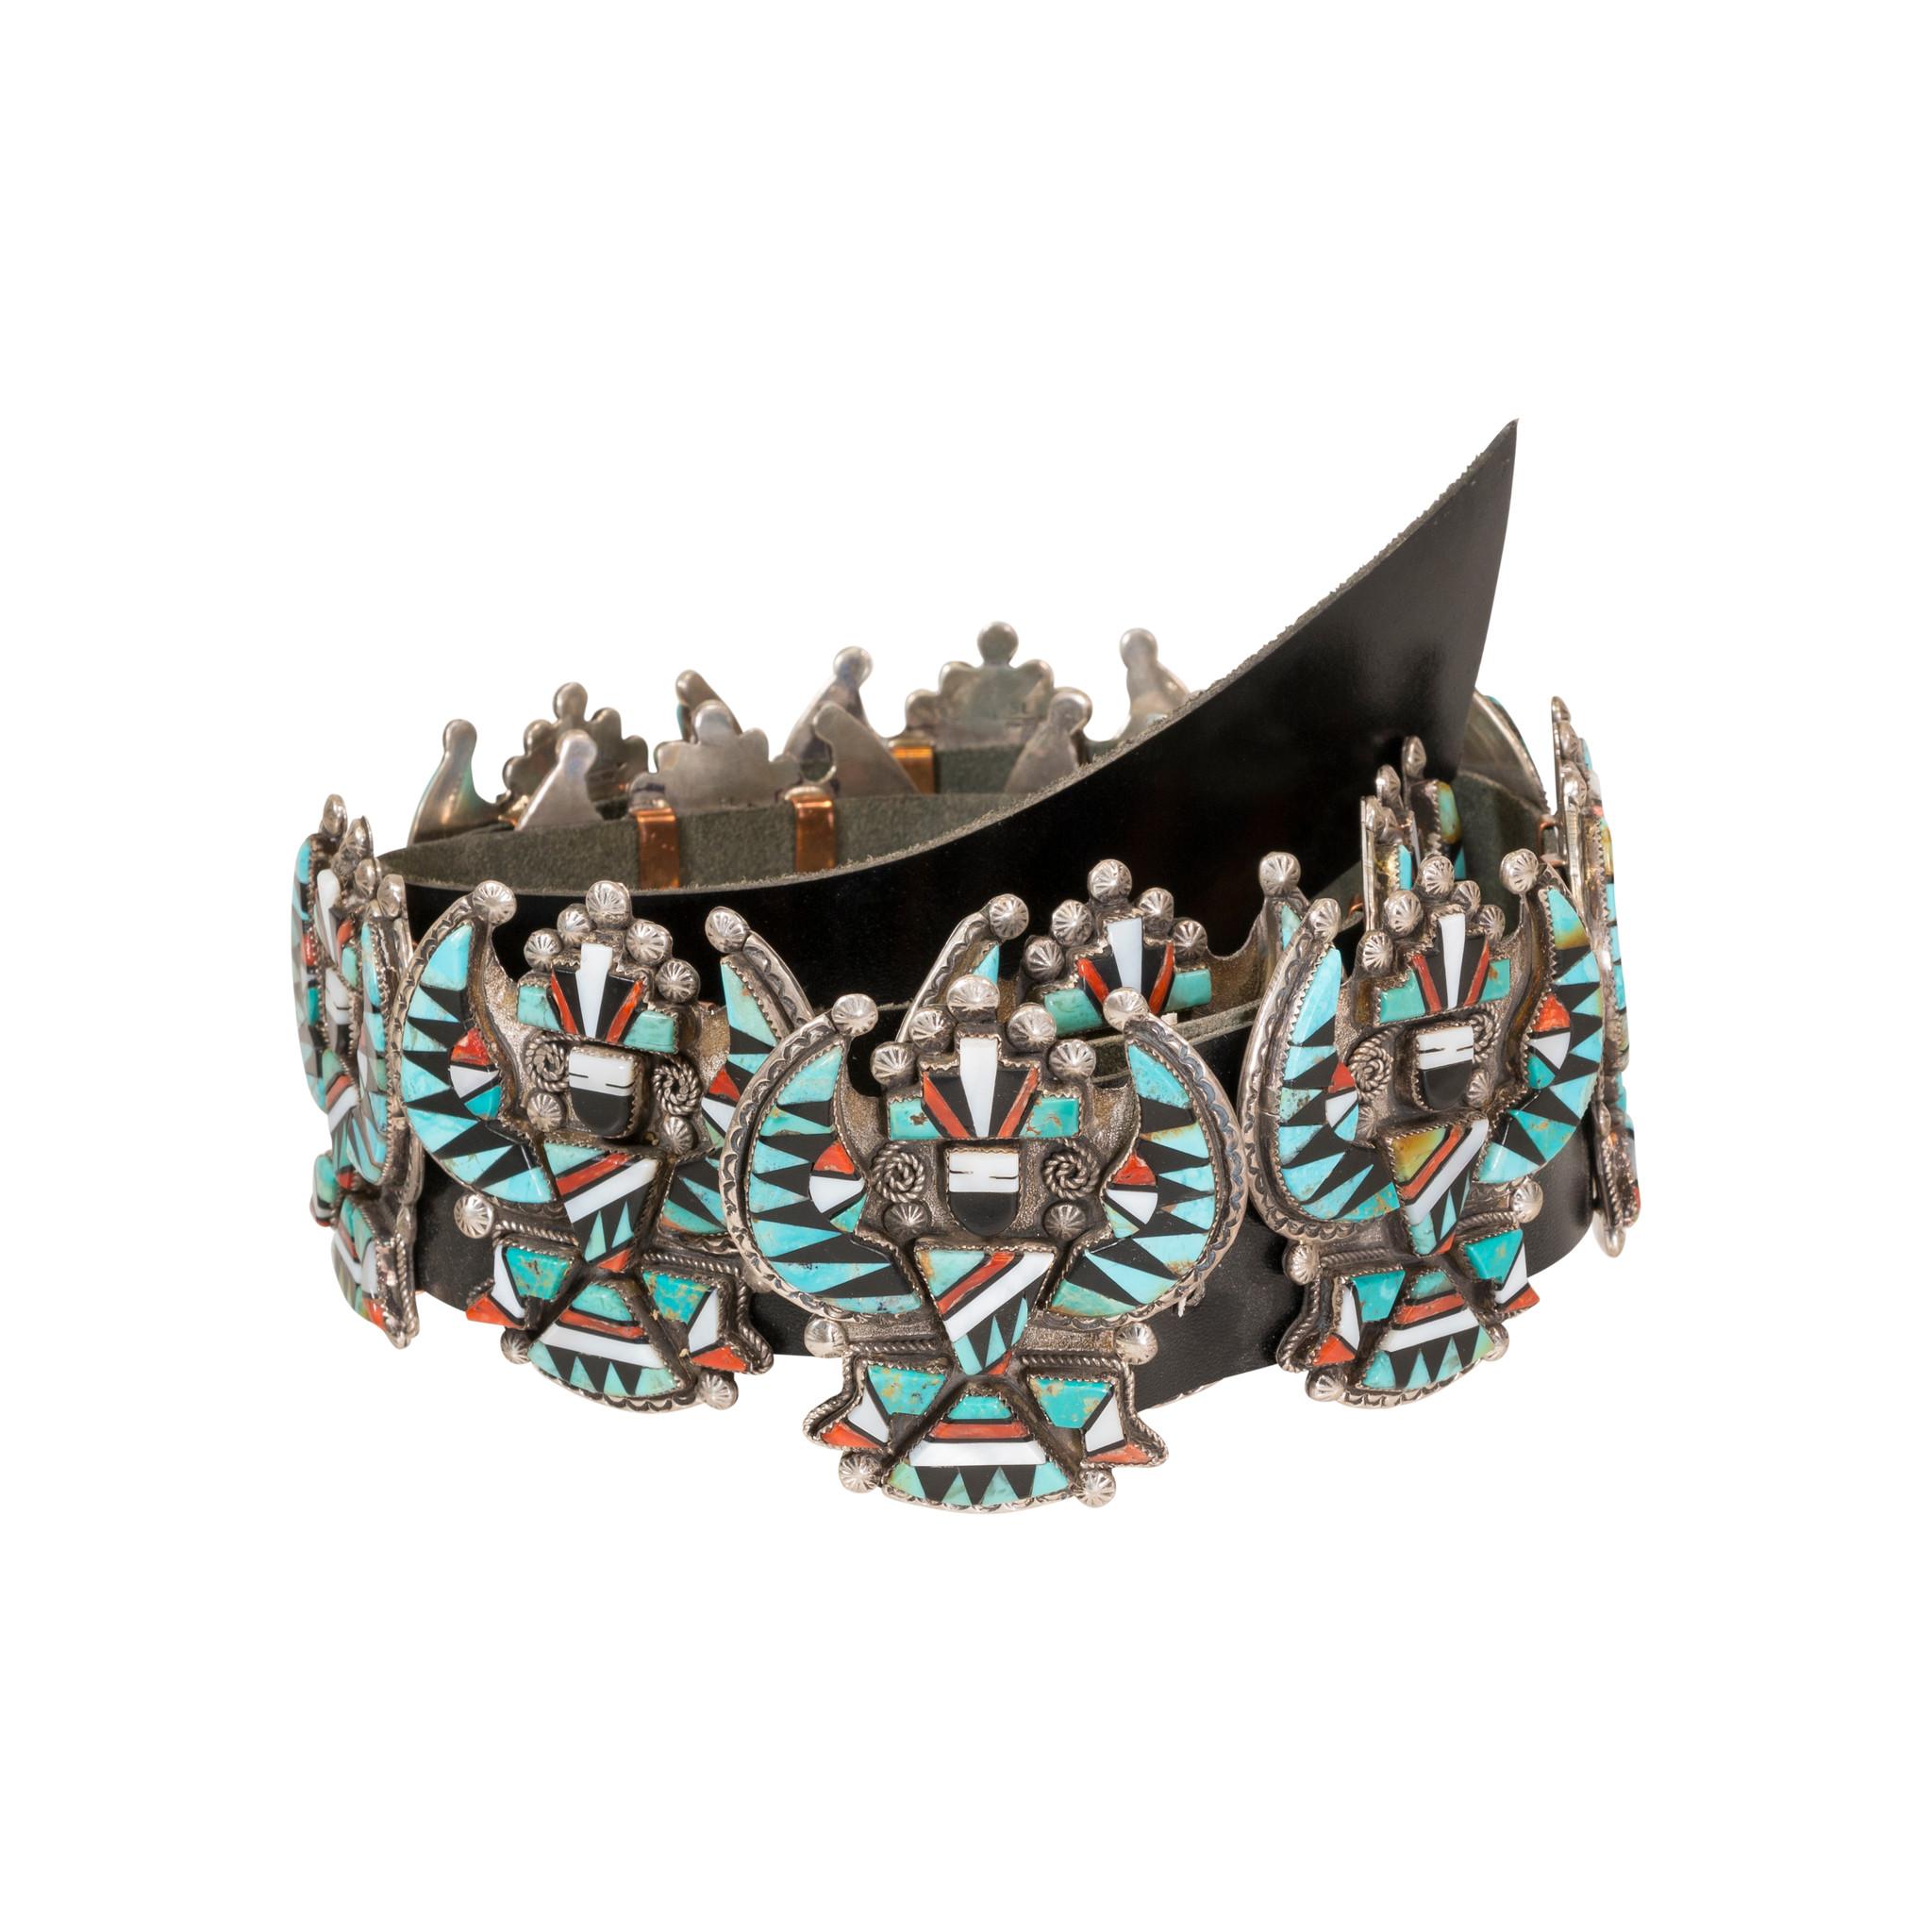 Uncut Stunning Zuni Inlaid Turquoise Concho Belt, Earrings and Necklace Set